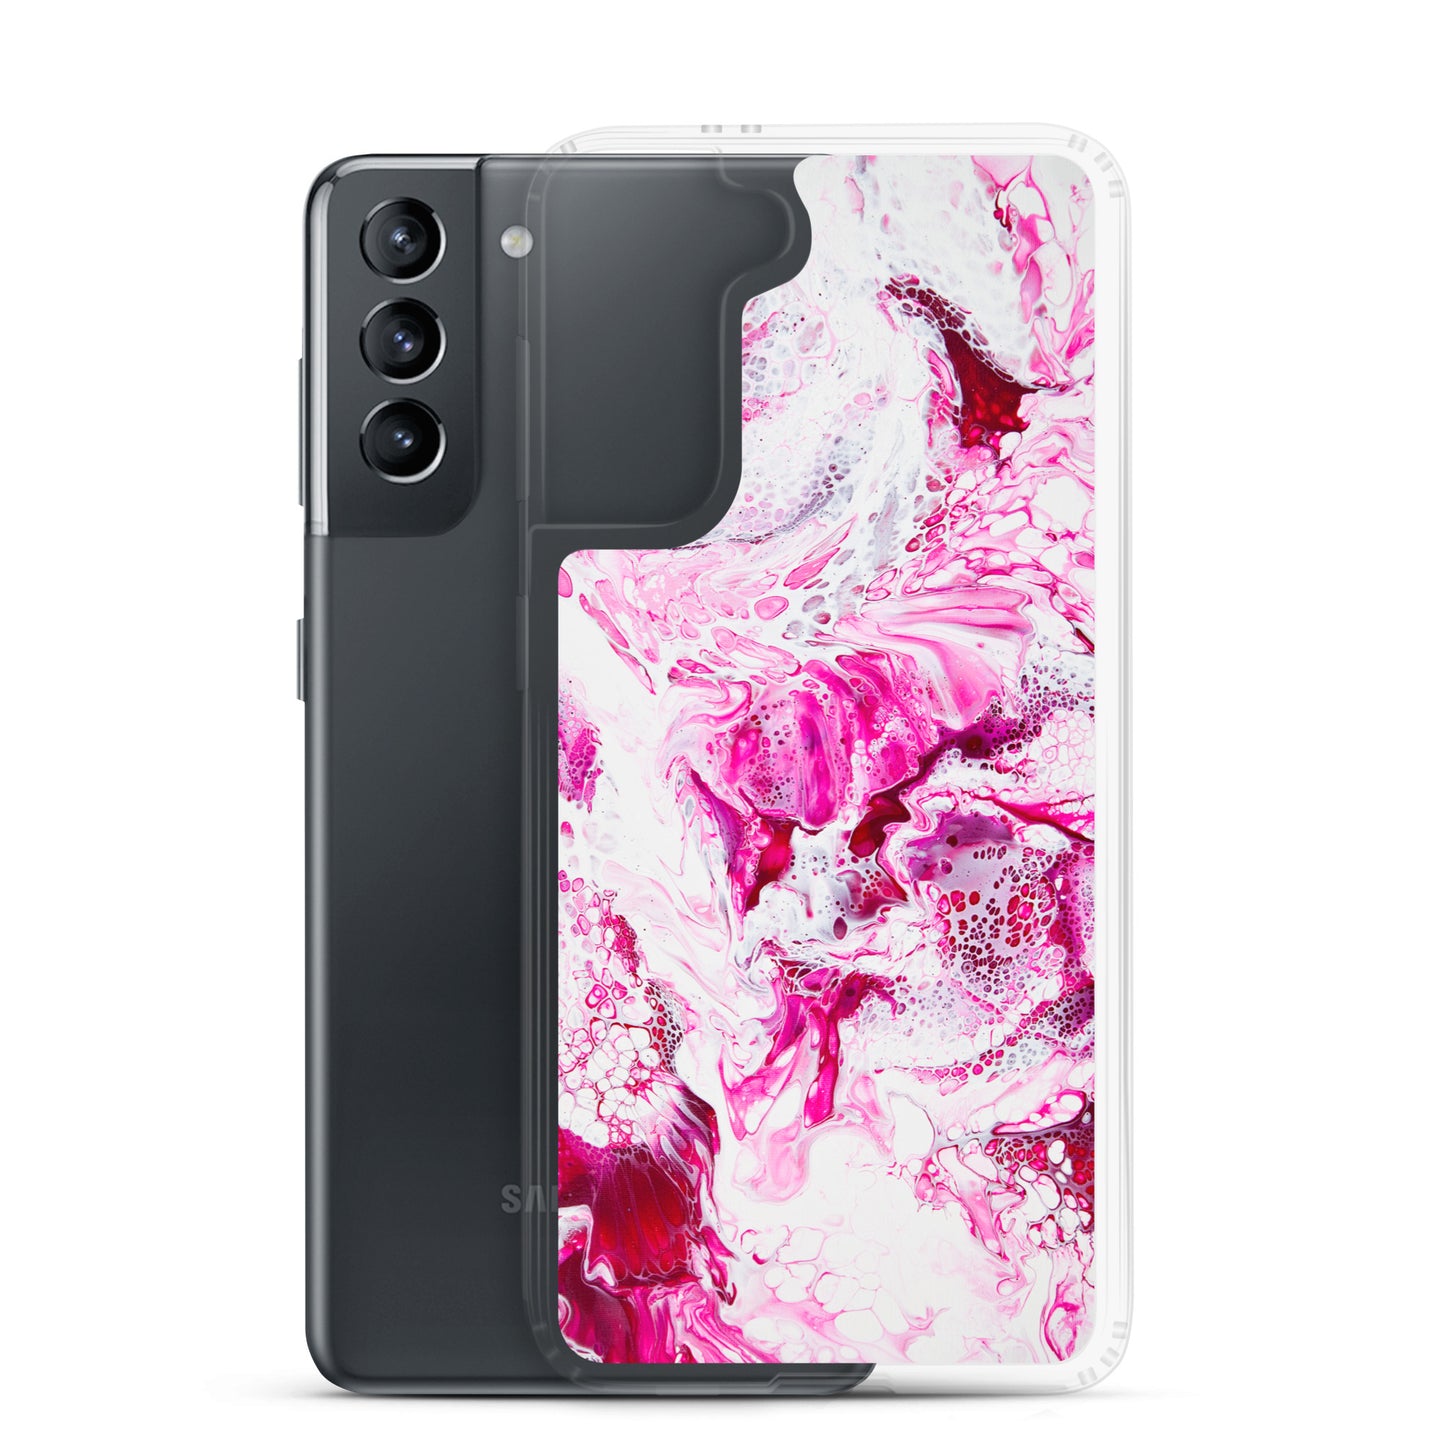 NightOwl Studio Custom Phone Case Compatible with Samsung Galaxy, Slim Cover for Wireless Charging, Drop and Scratch Resistant, Pink Distortion